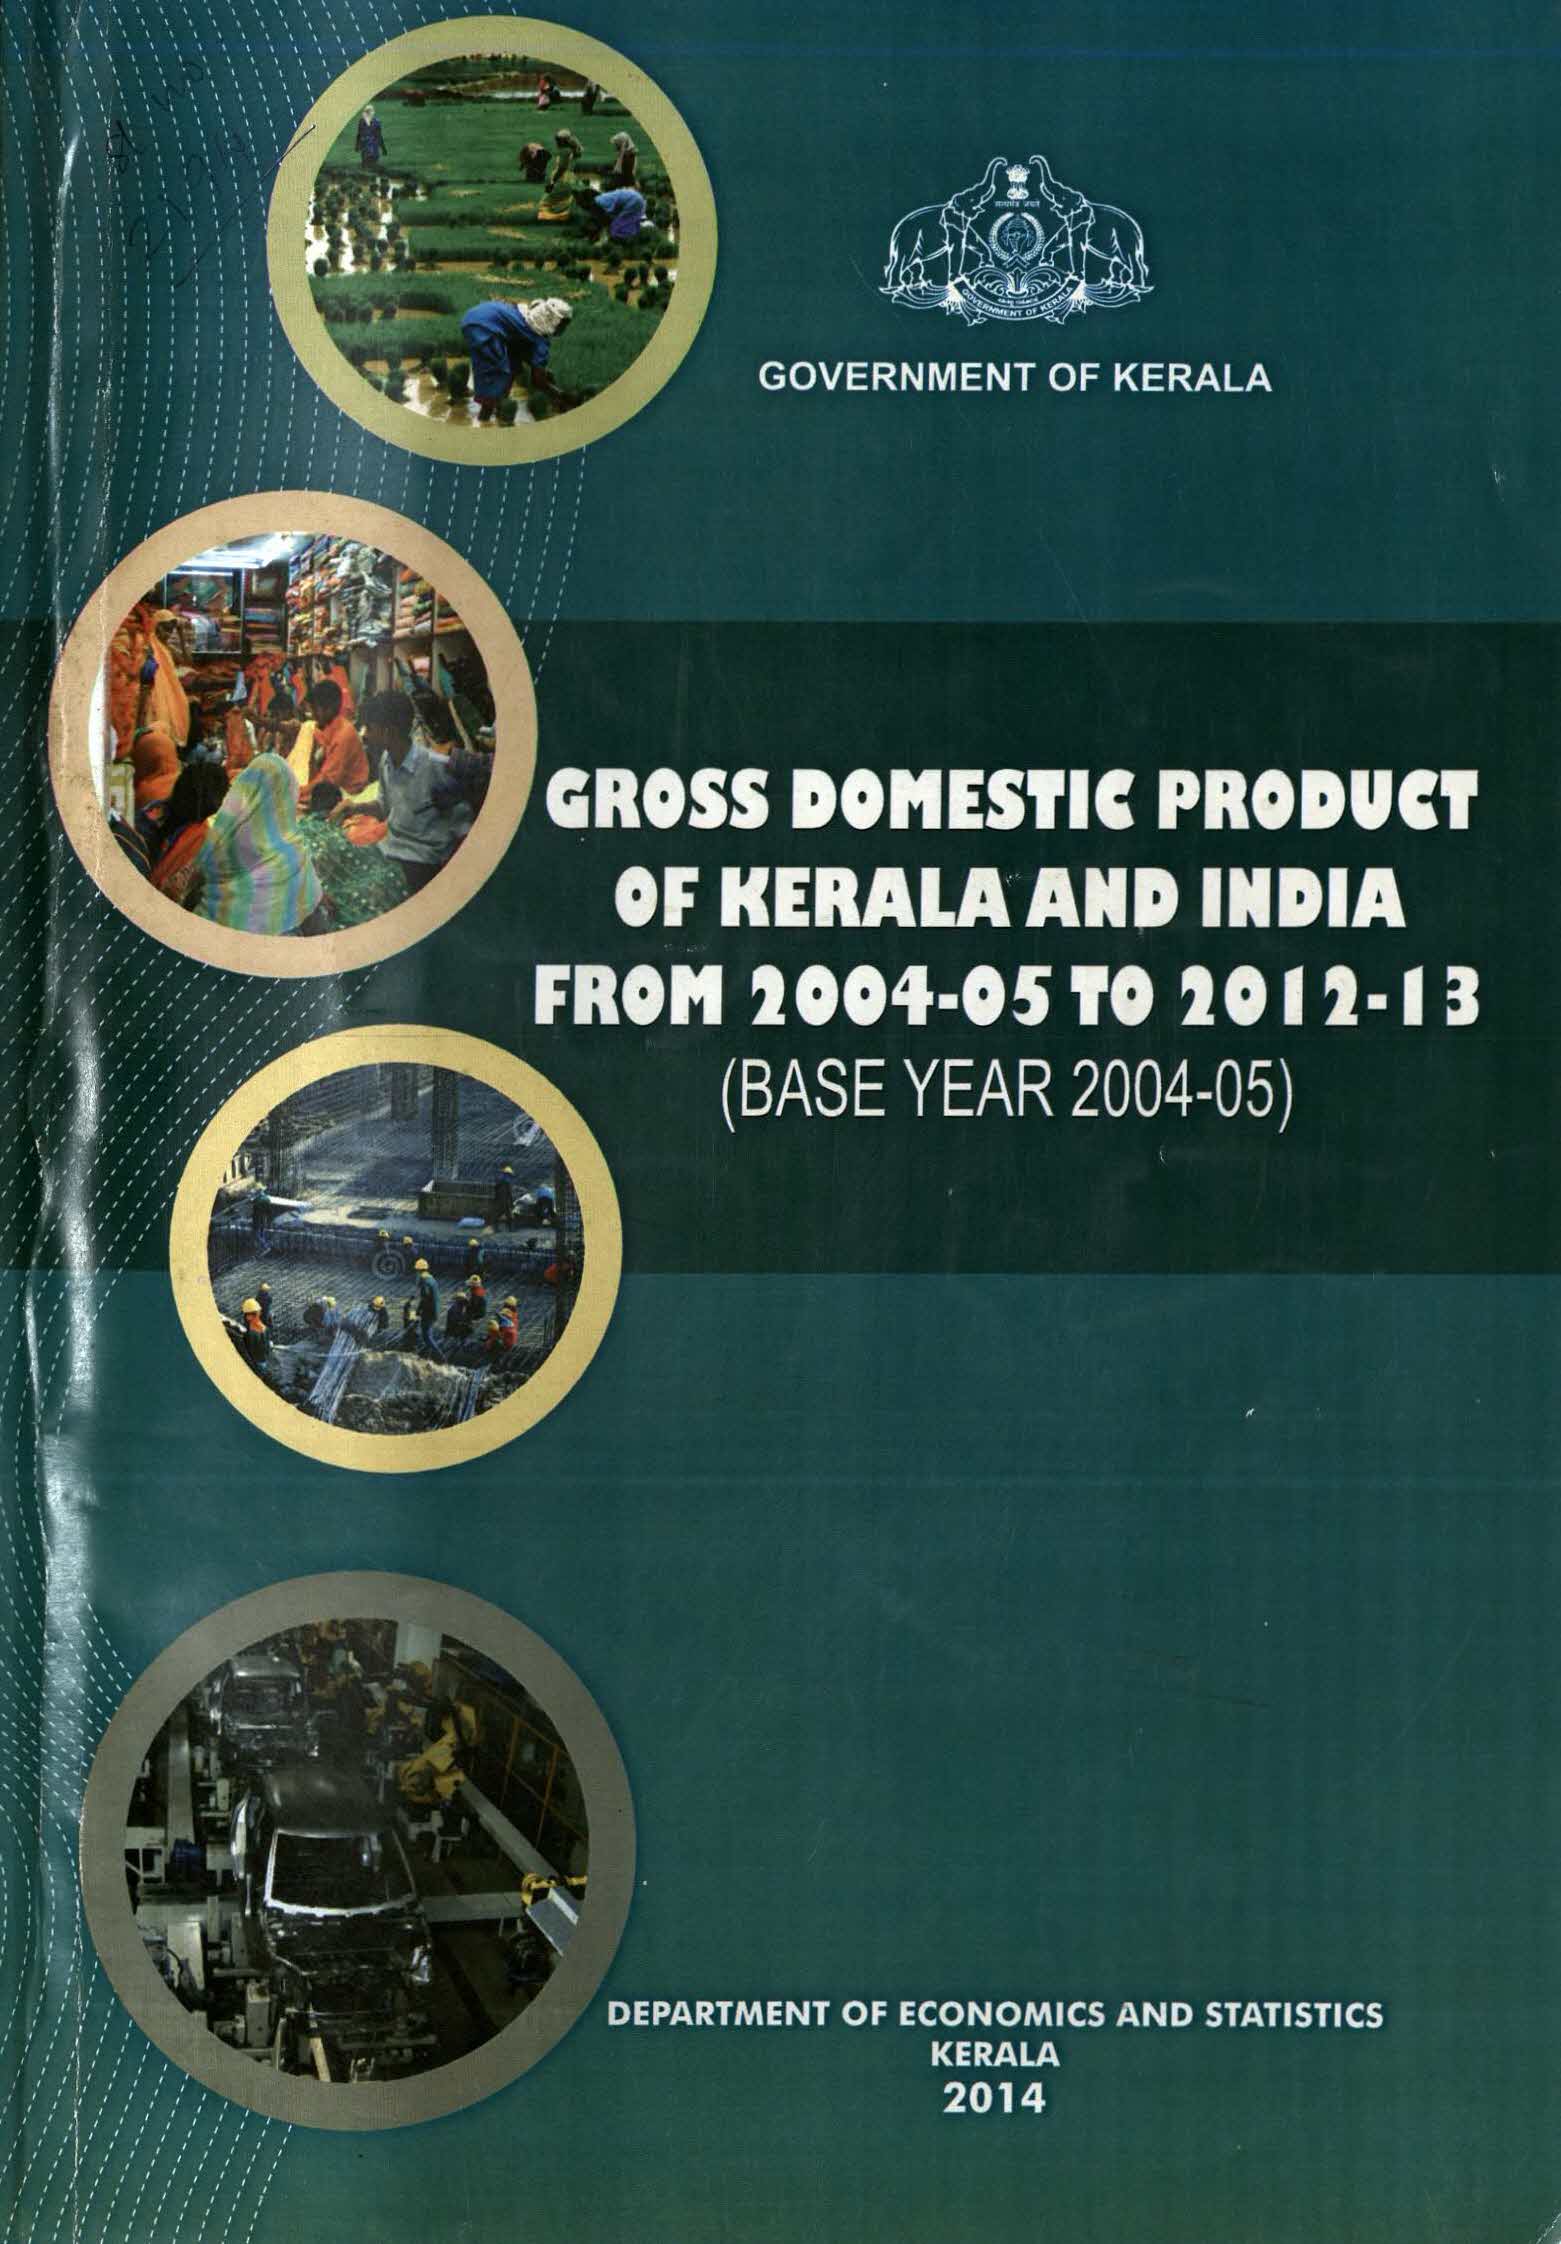 GDP of Kerala and India from 2004-05 to 2012-13